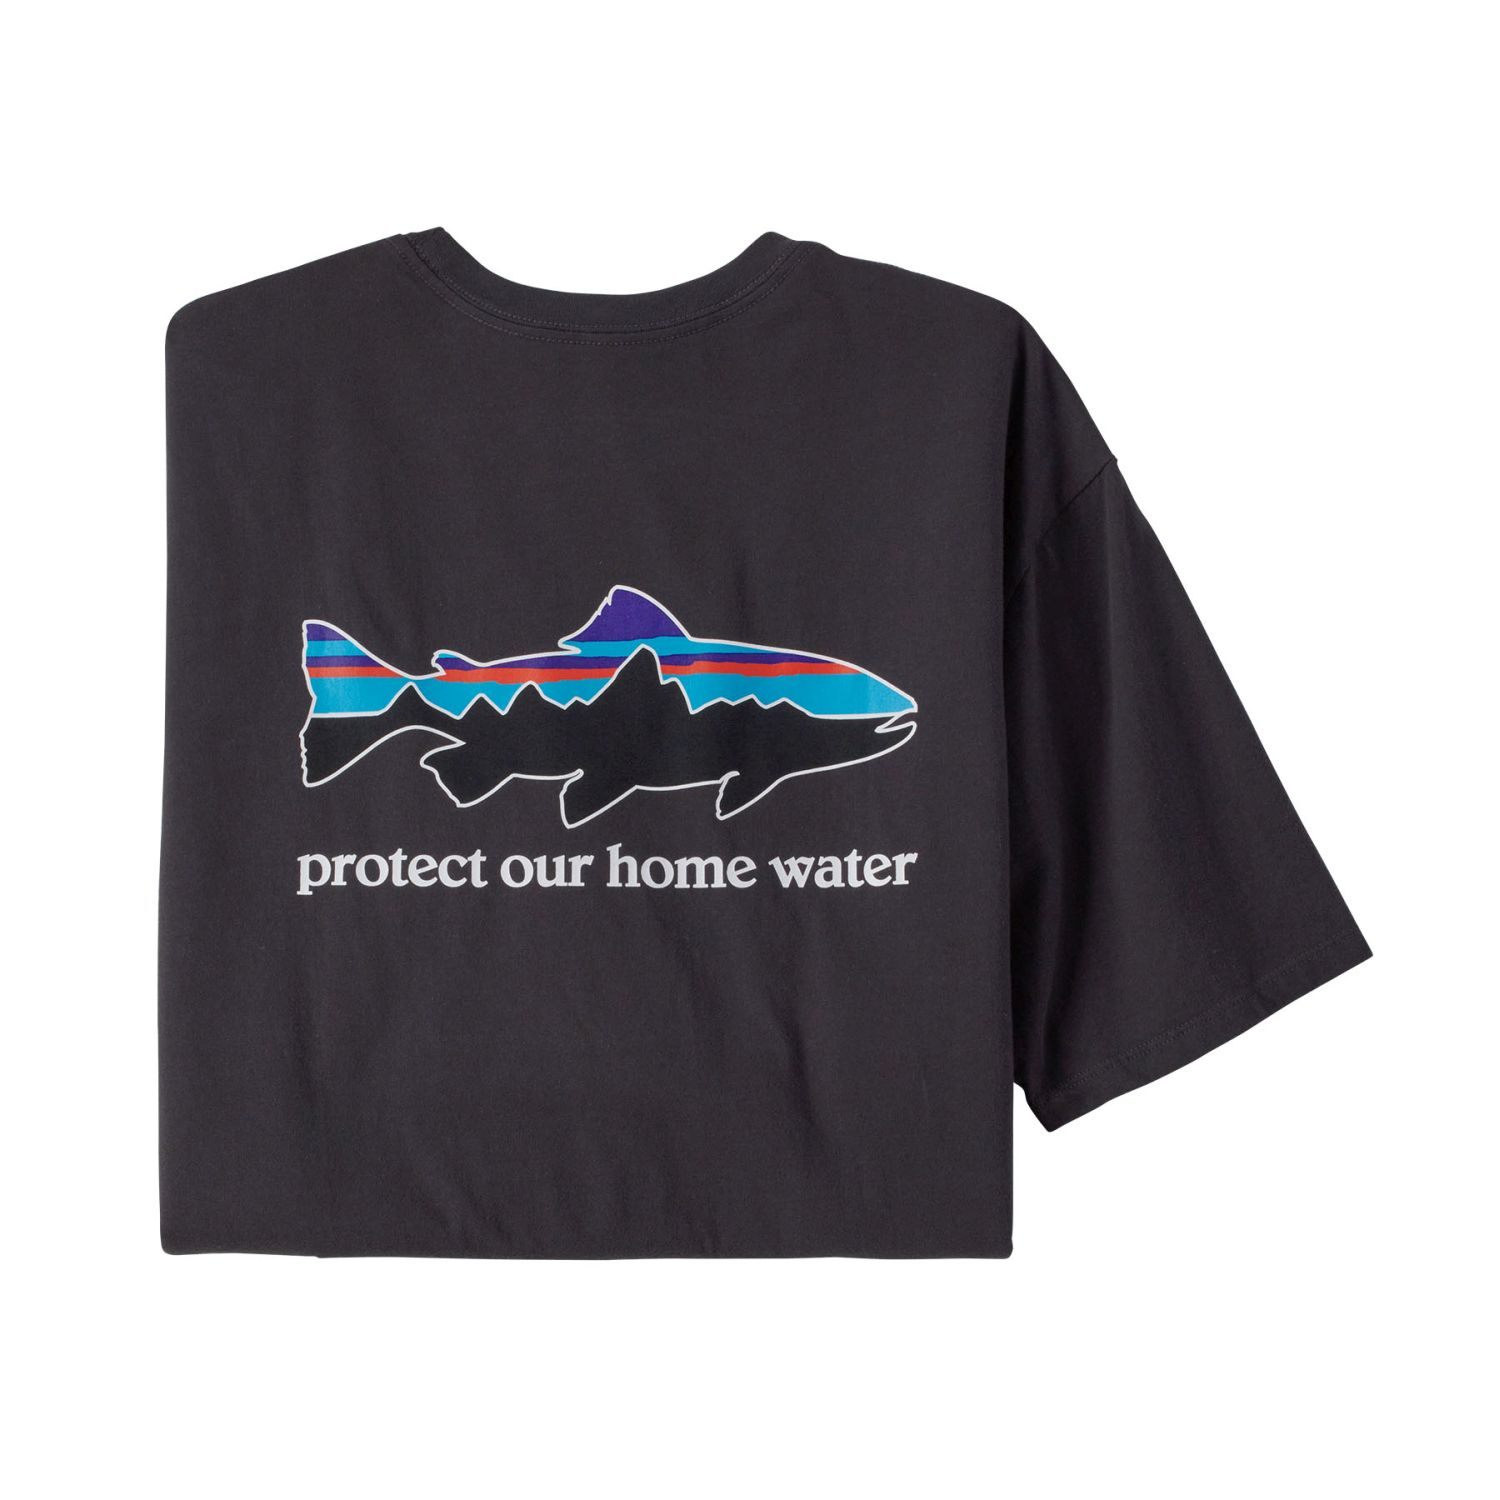 Home Water Trout Organic T-Shirt  (ink black)